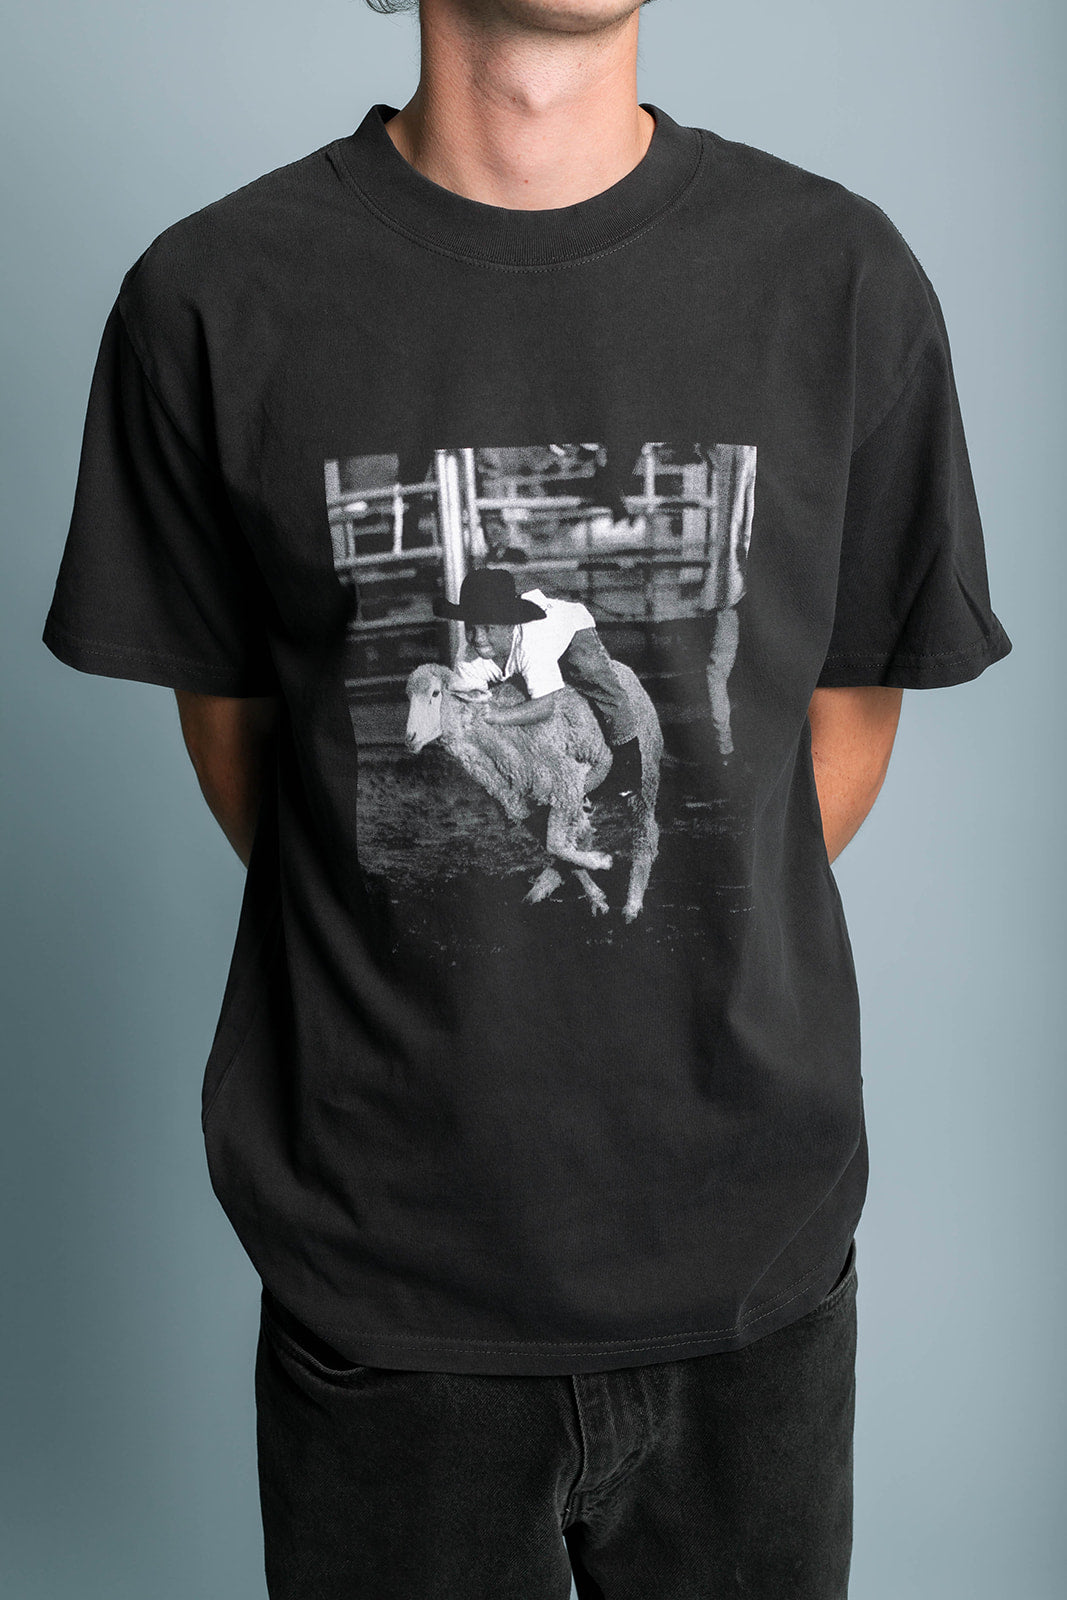 Mutton Busting Tee